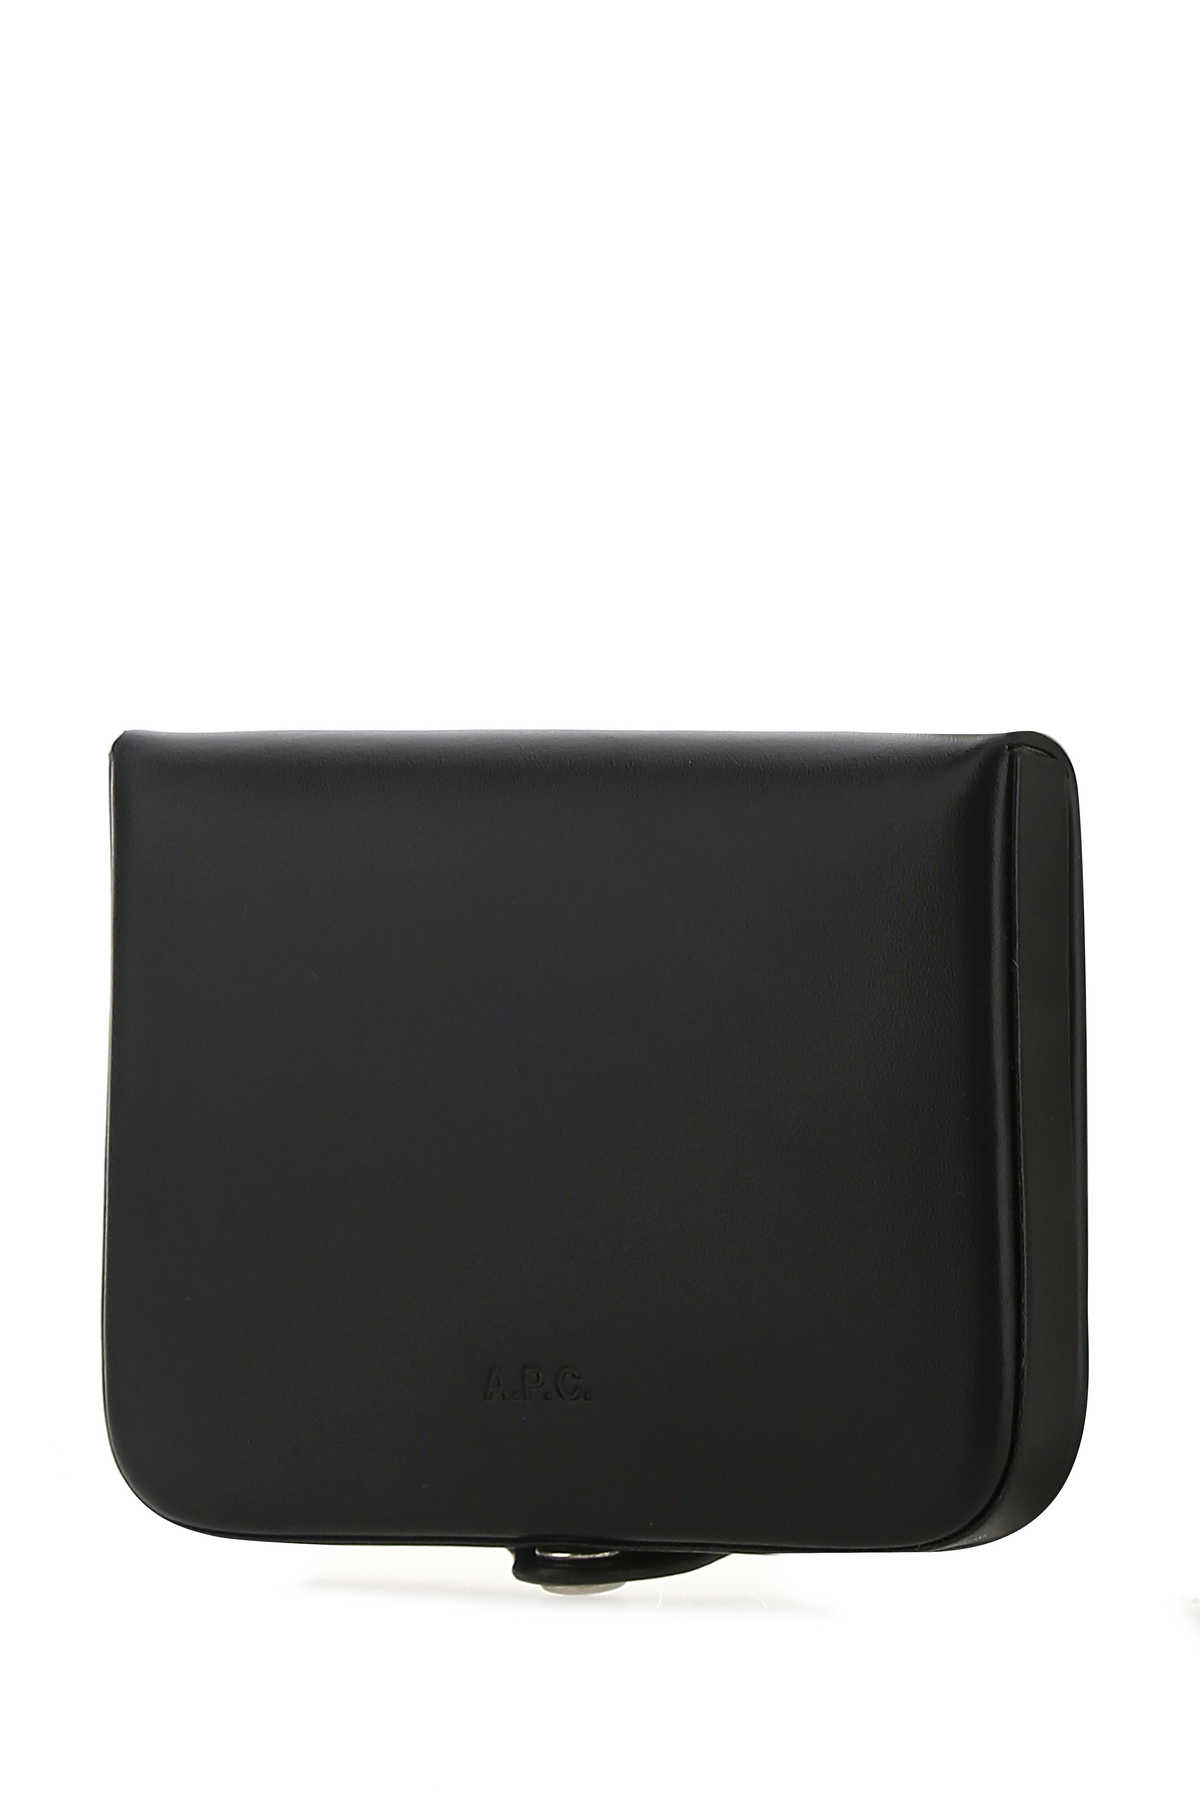 Shop Apc Black Leather Card Holder In Lzz